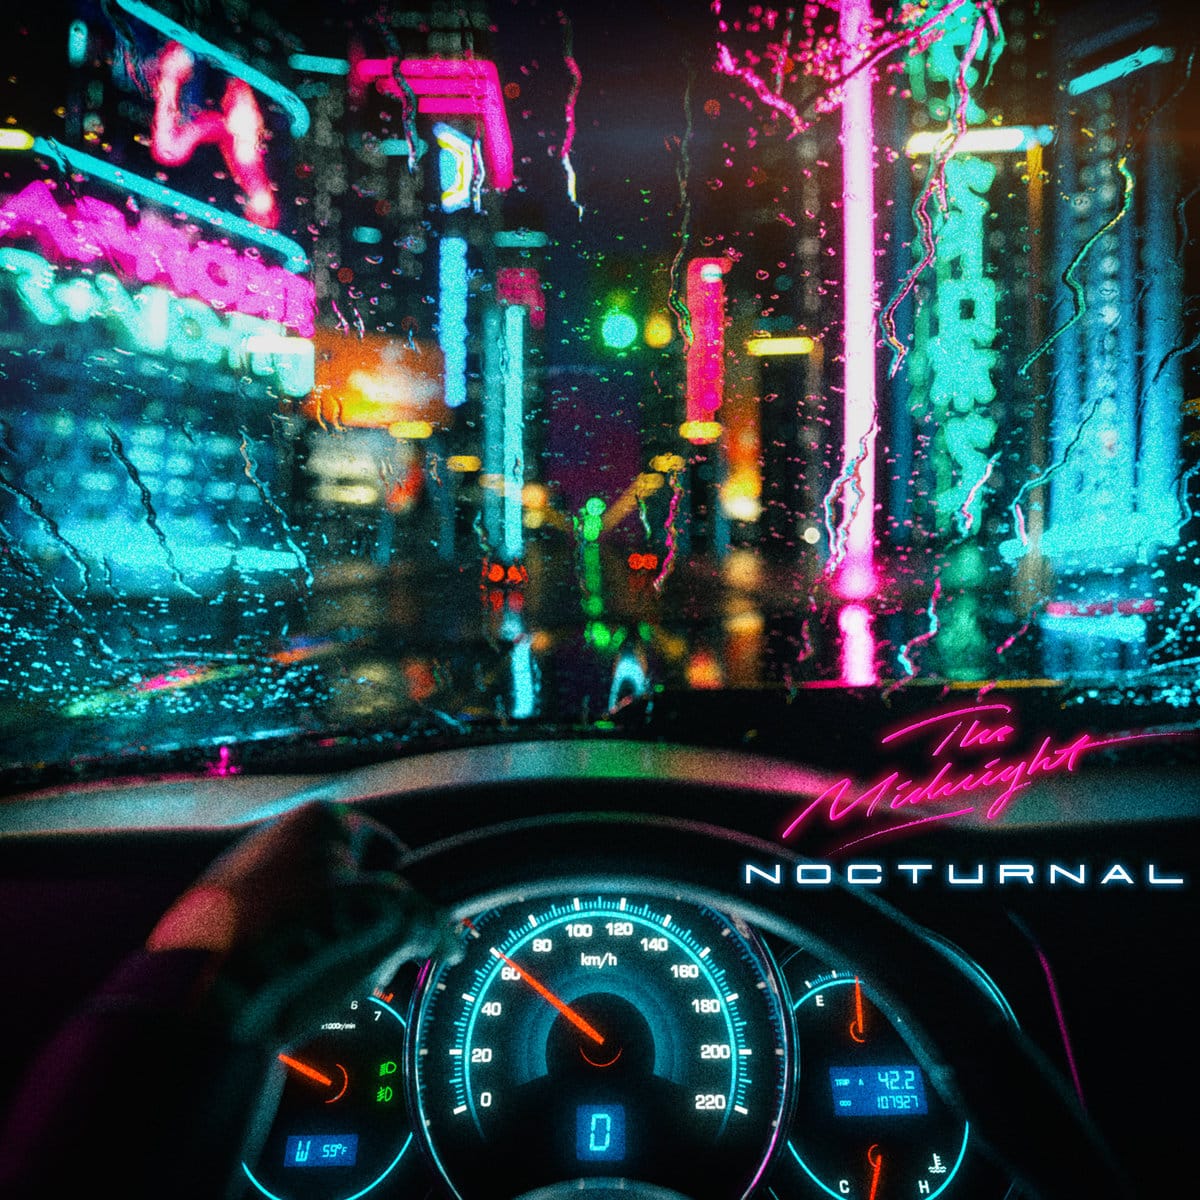 How to make synthwave: The Midnight "Nocturnal" album cover